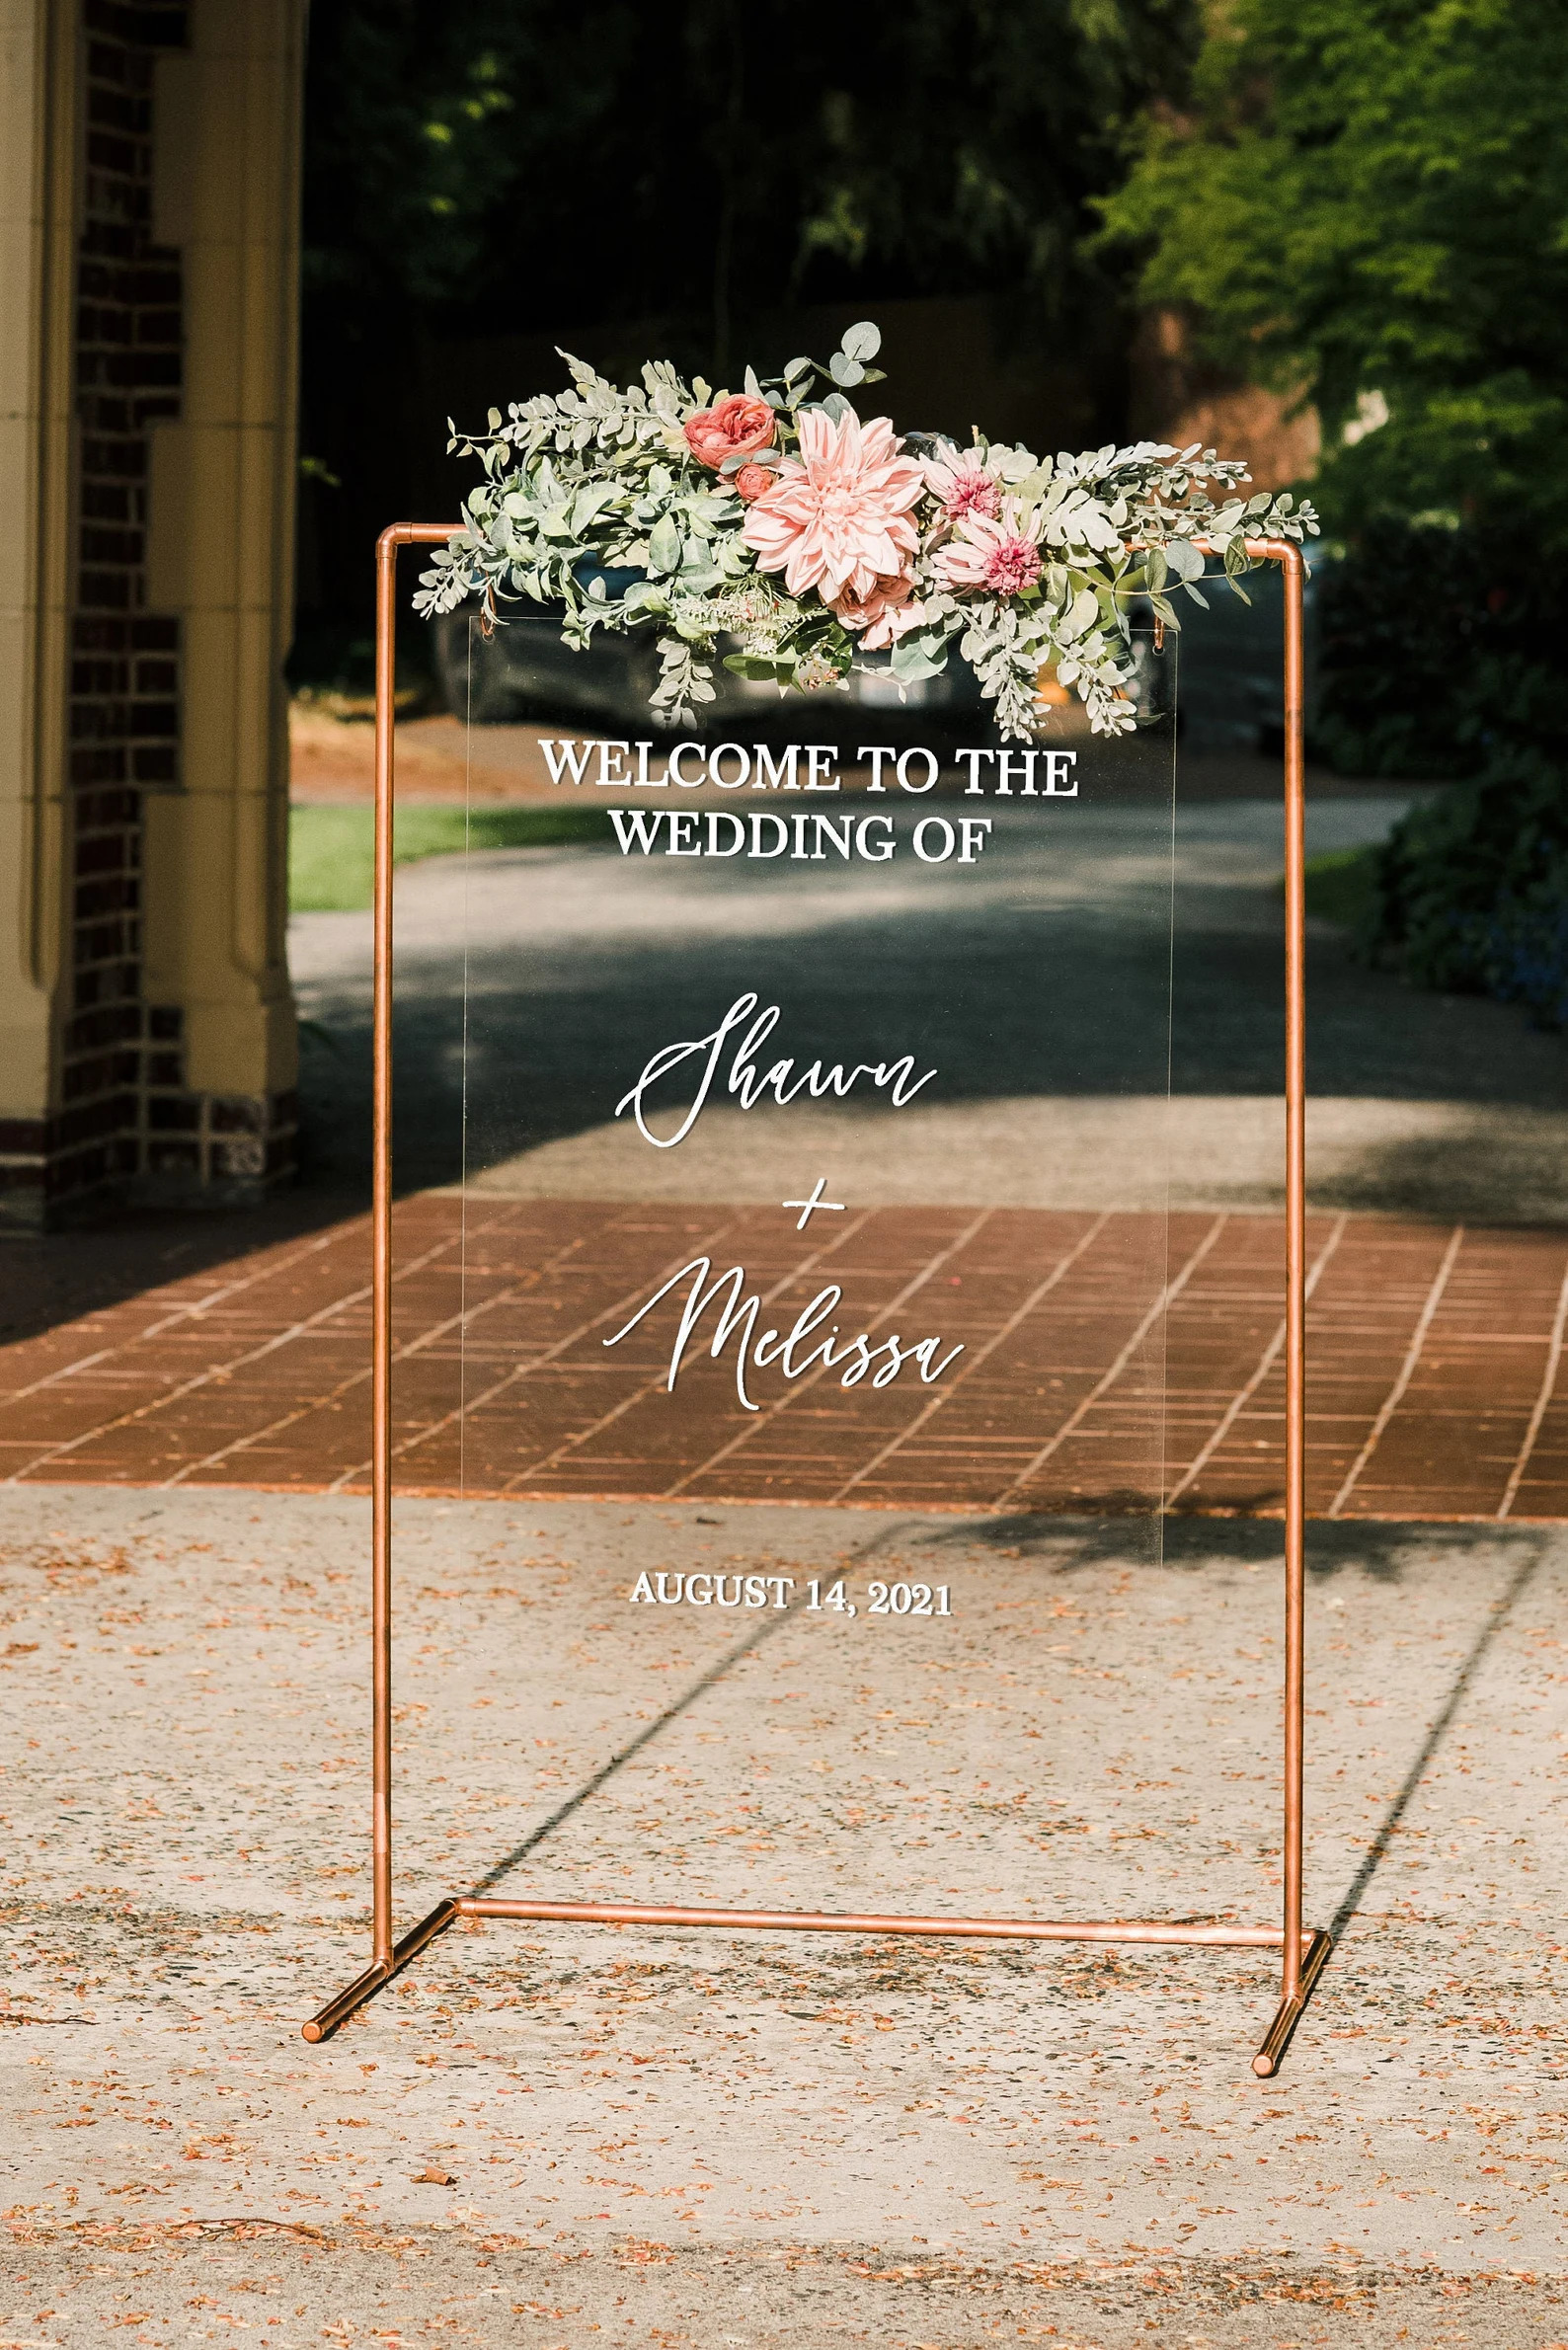 15 Delightful Wedding Welcome Sign Designs That Will Greet Your Guests